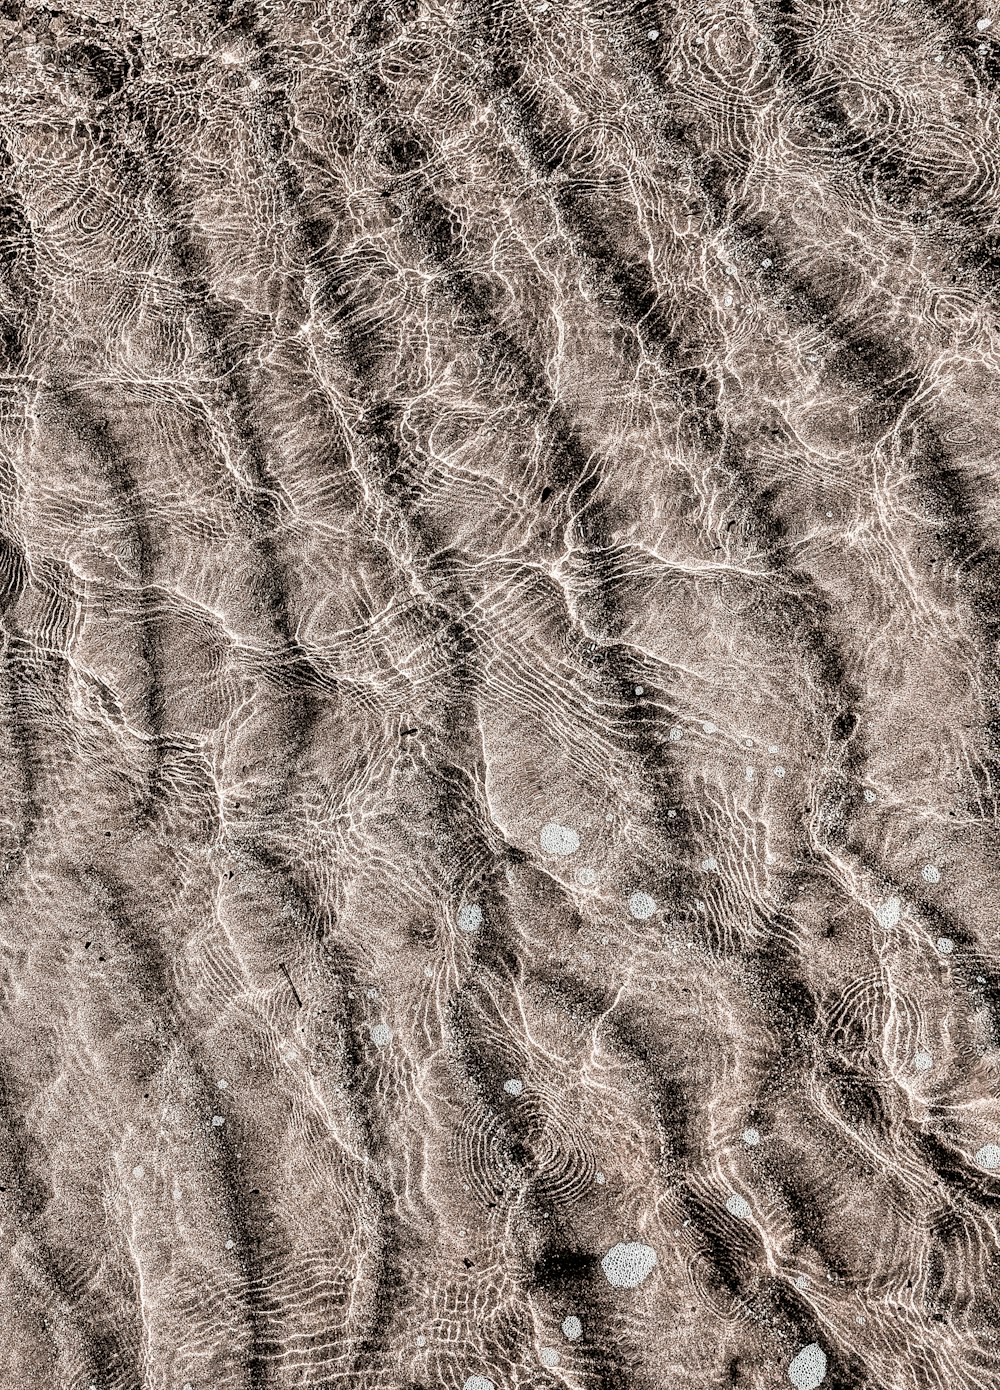 a close up of water ripples on a sandy beach